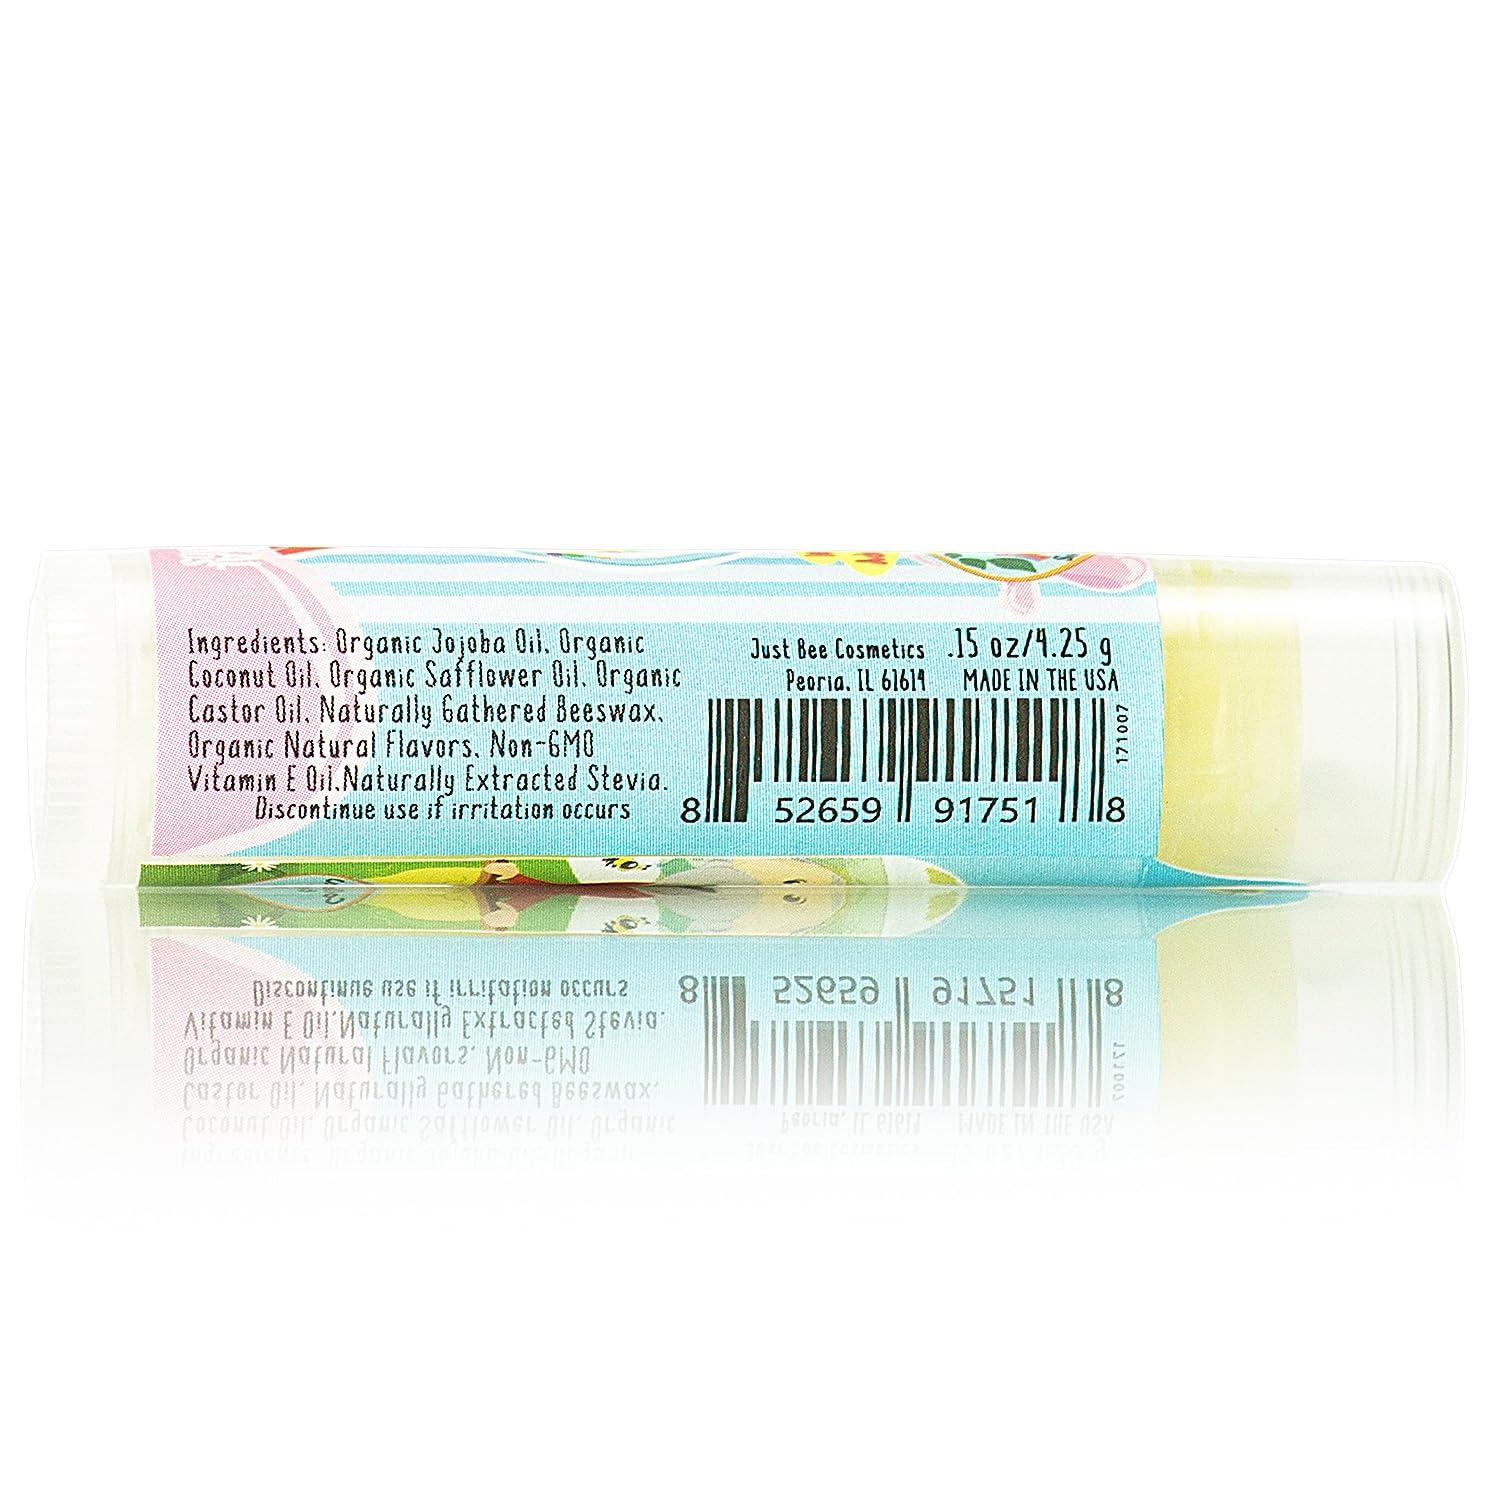 Lappy Lips Organic 100% Natural, Lip Balm Chap stick for Kids, Toddlers (4  flavors) - Organic Essential Oil - for Dry Chapped Lips to Restore and Heal